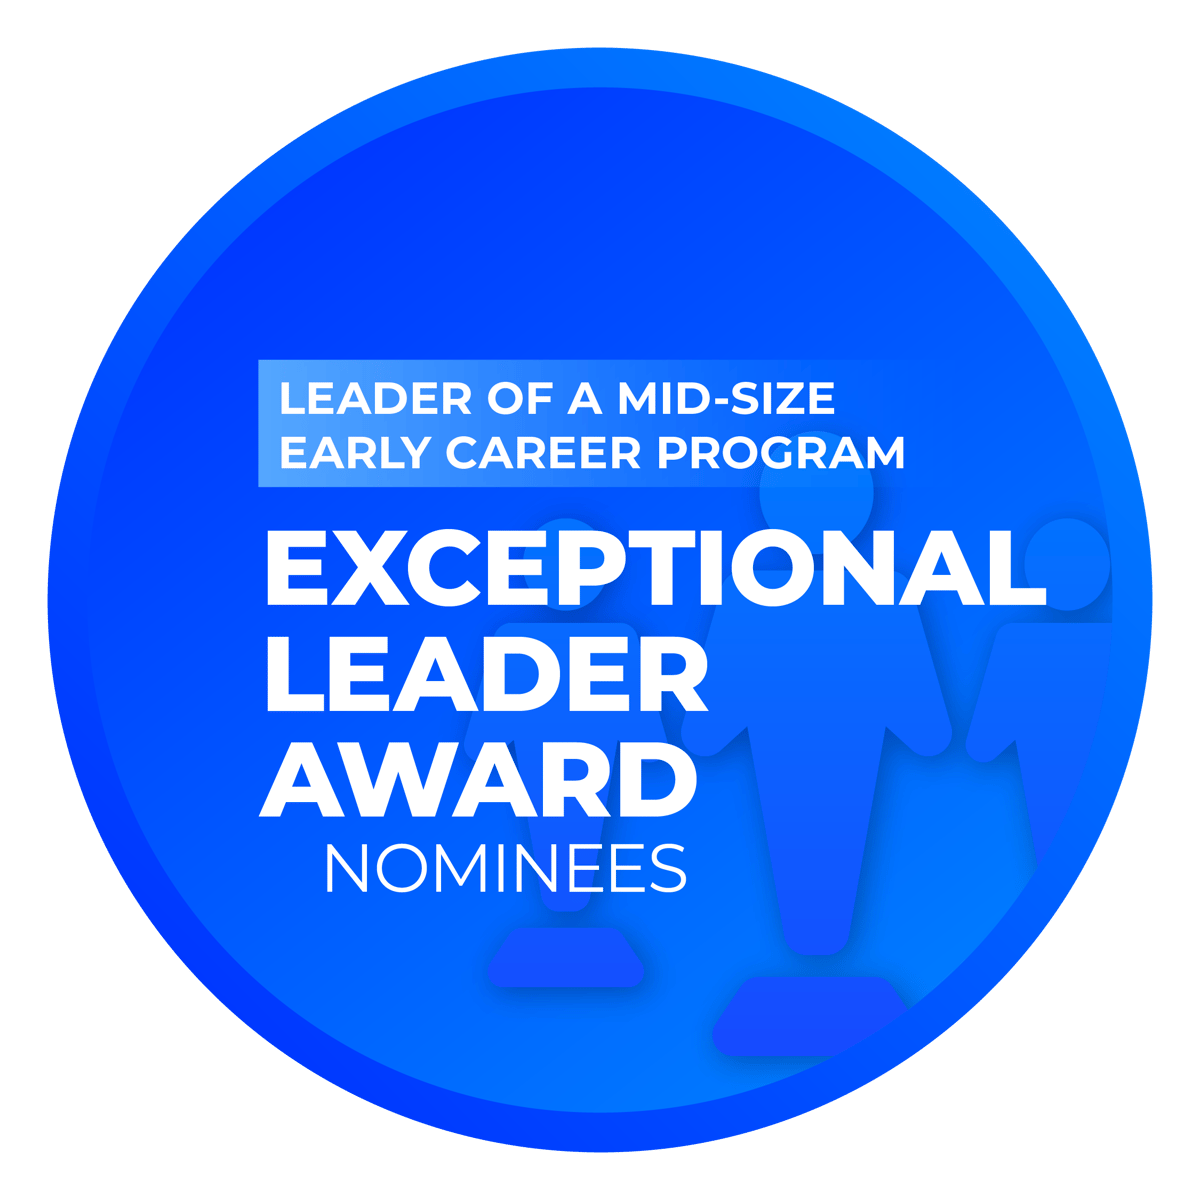 Exceptional Leader Award: Mid-Size Early Career Program Nominees